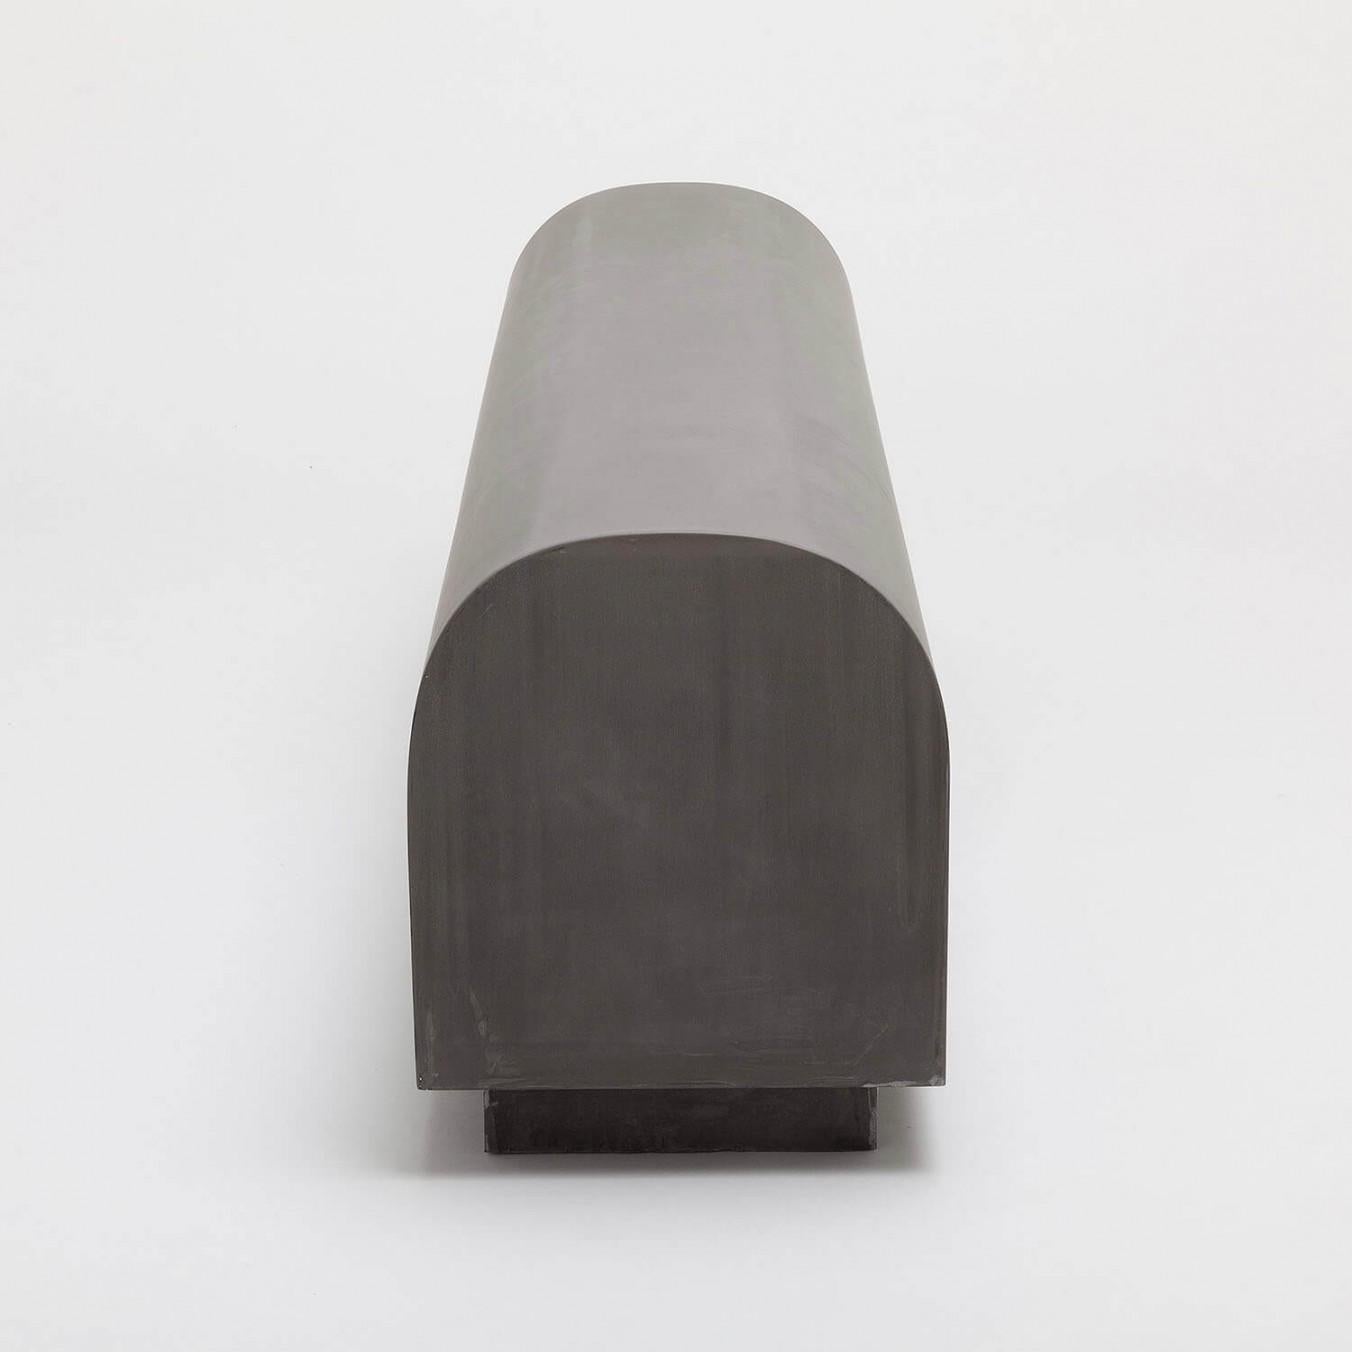 Contemporary plaster bench - chubby bench by Faye Toogood
This is shown in the charcoal plaster finish. 

Design: Faye Toogood
Material: Sealed Reinforced plaster
Available also in chalk, cream or storm finish

A bench, with the reassuring